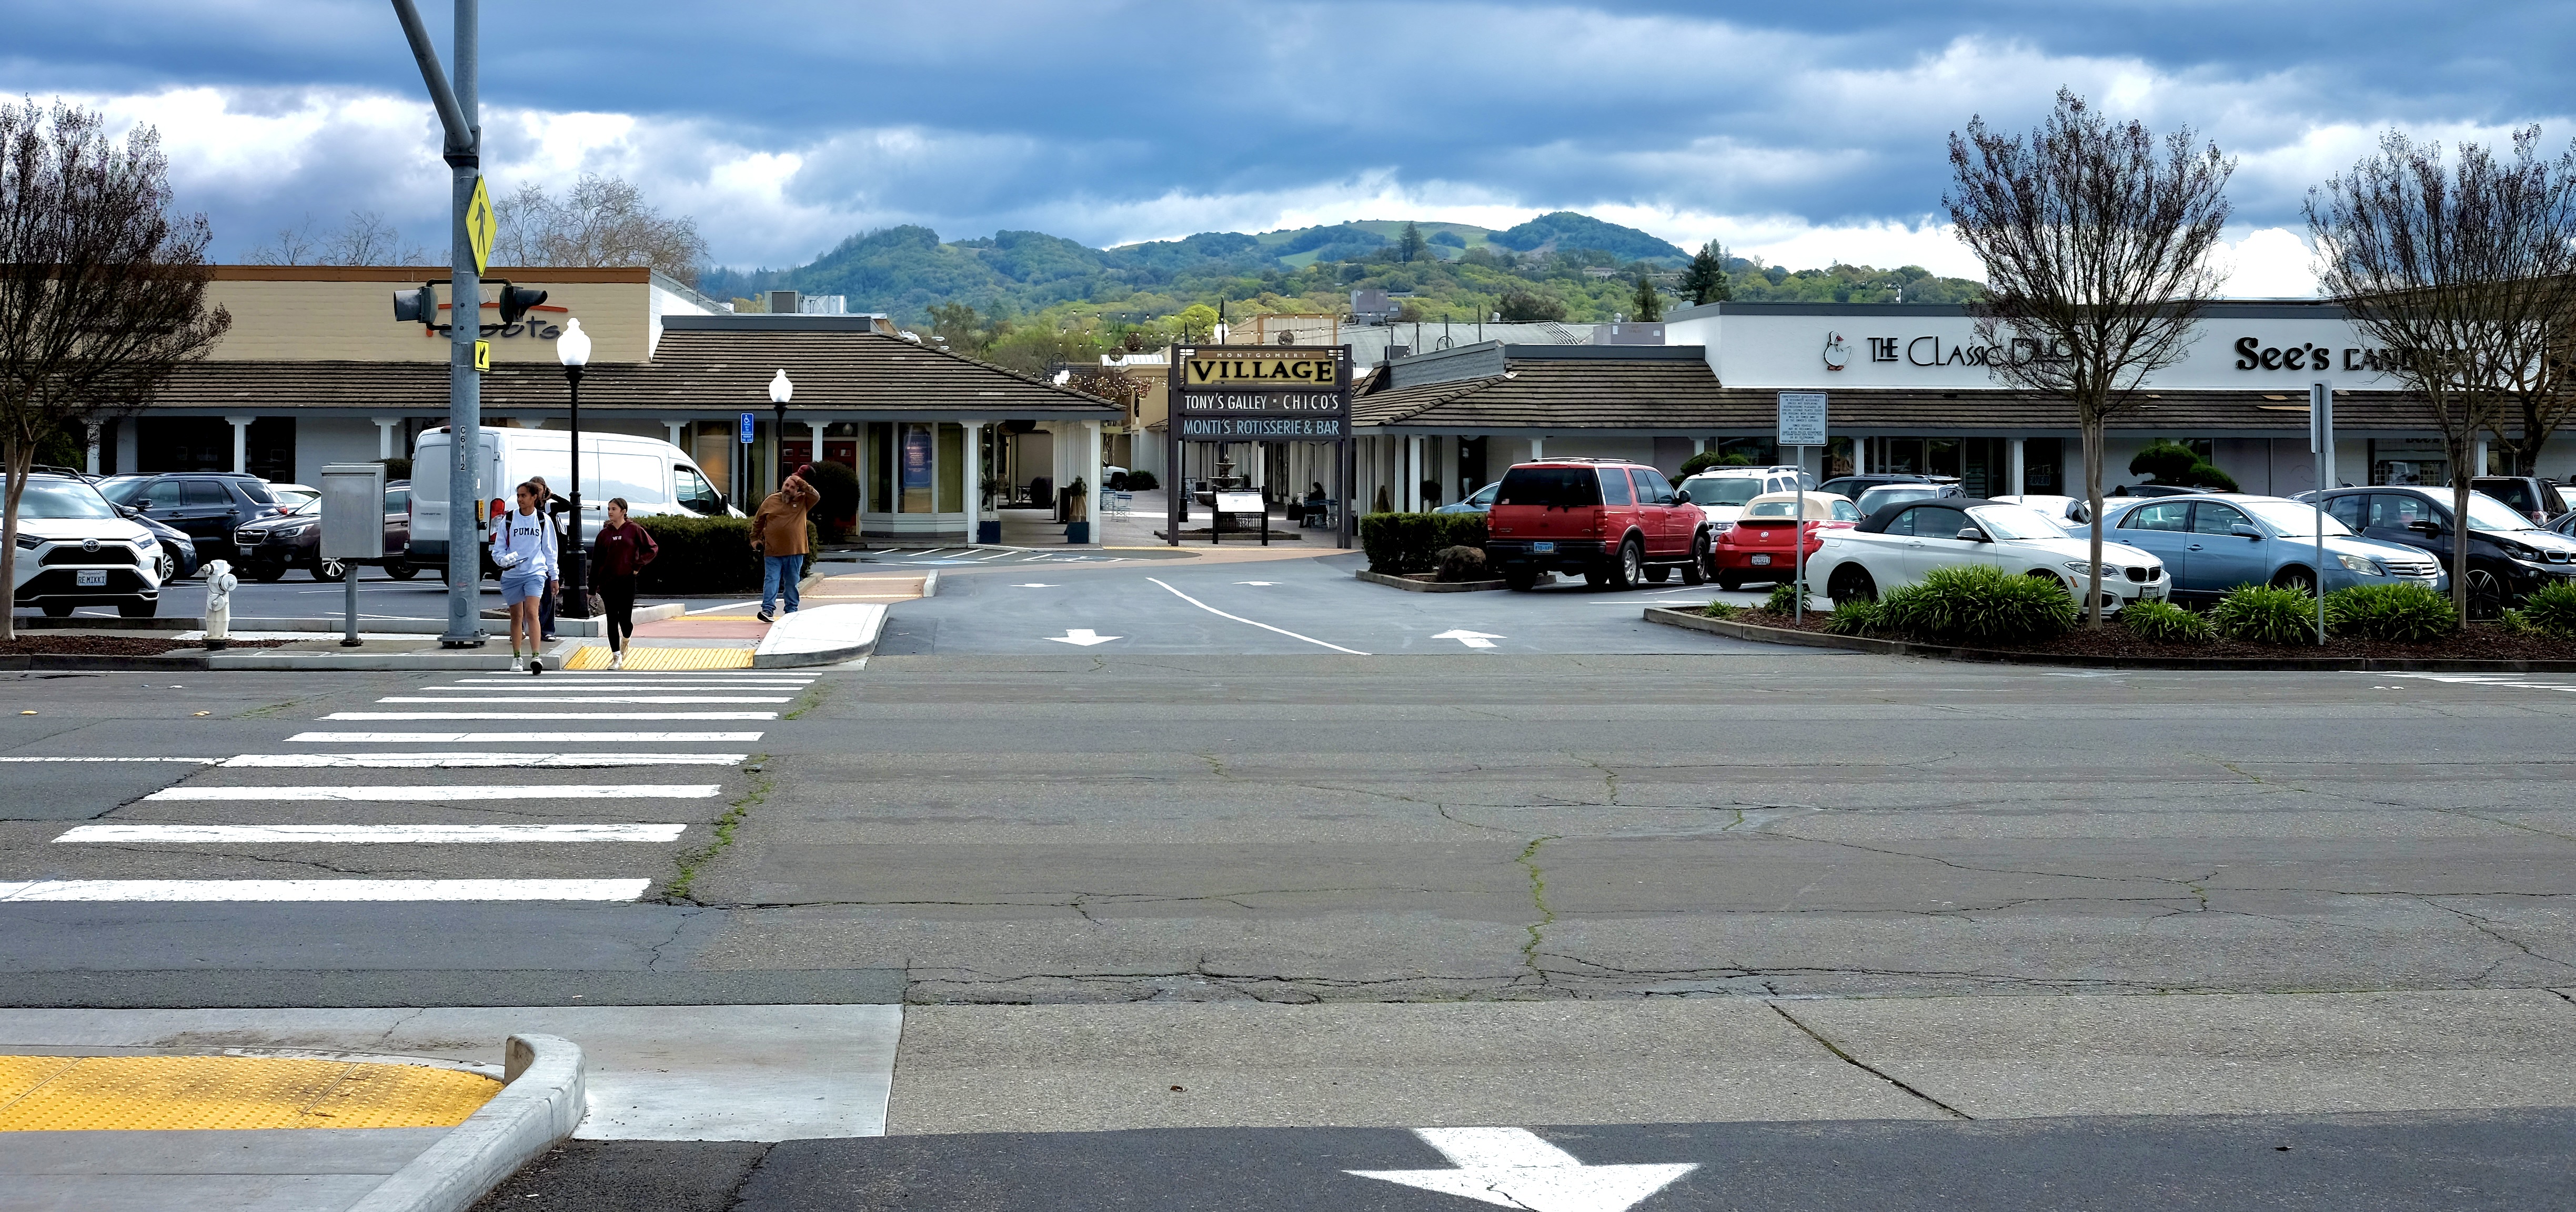 The entrance to an outdoor mall, with mountains in the background and a crosswalk to the left.